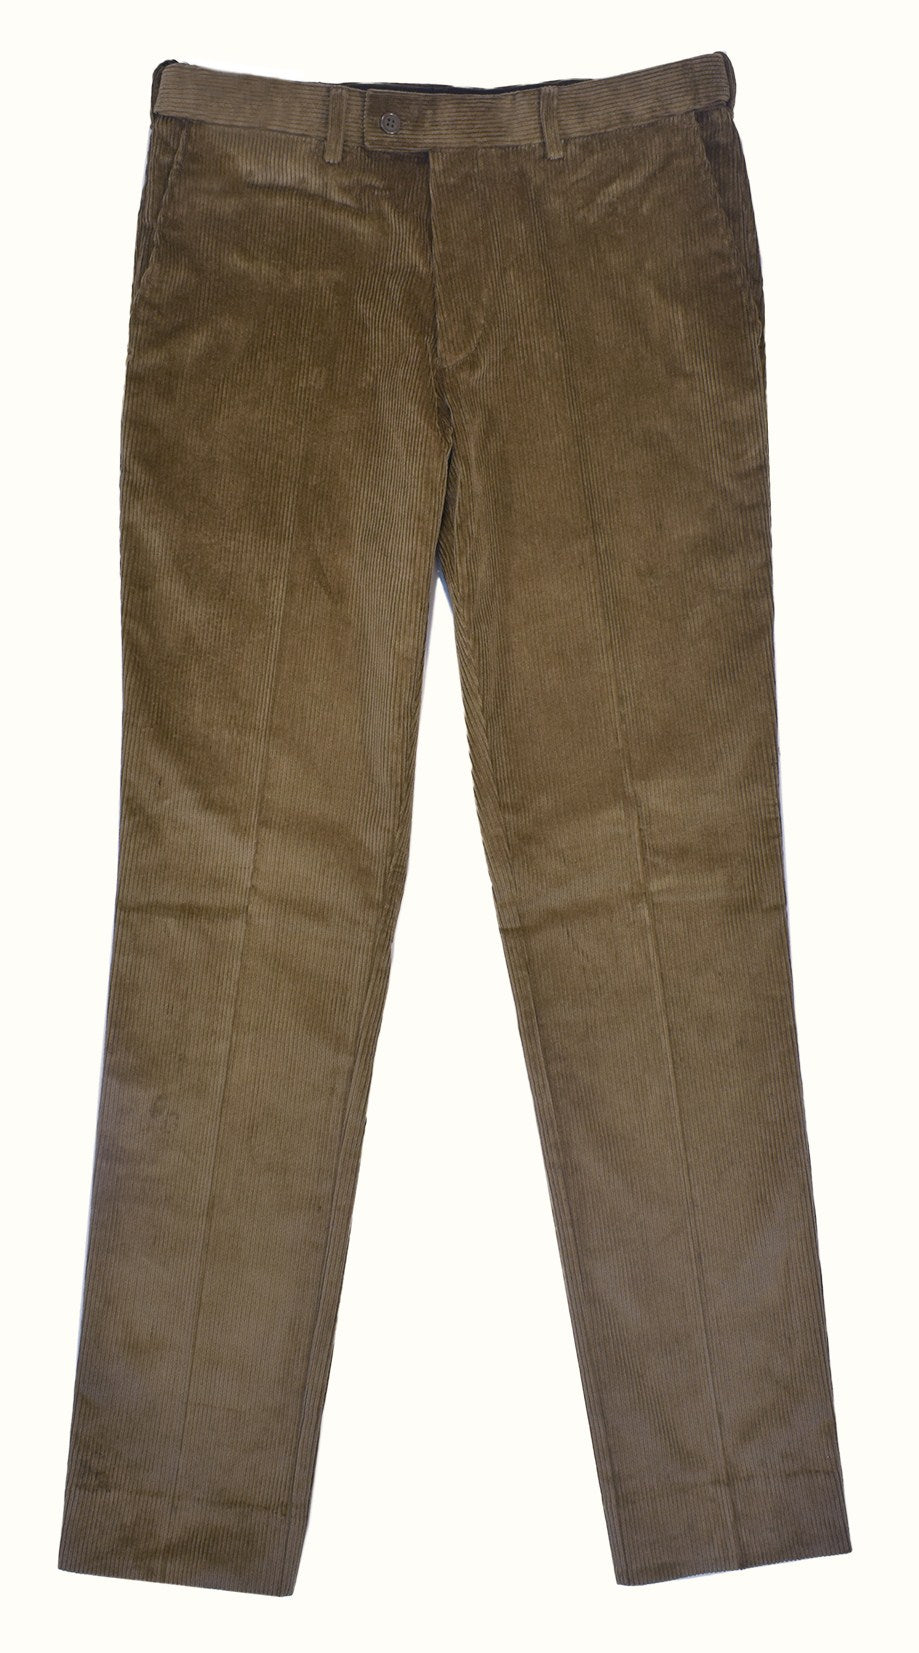 Country Look Texel Dress Cord Trouser